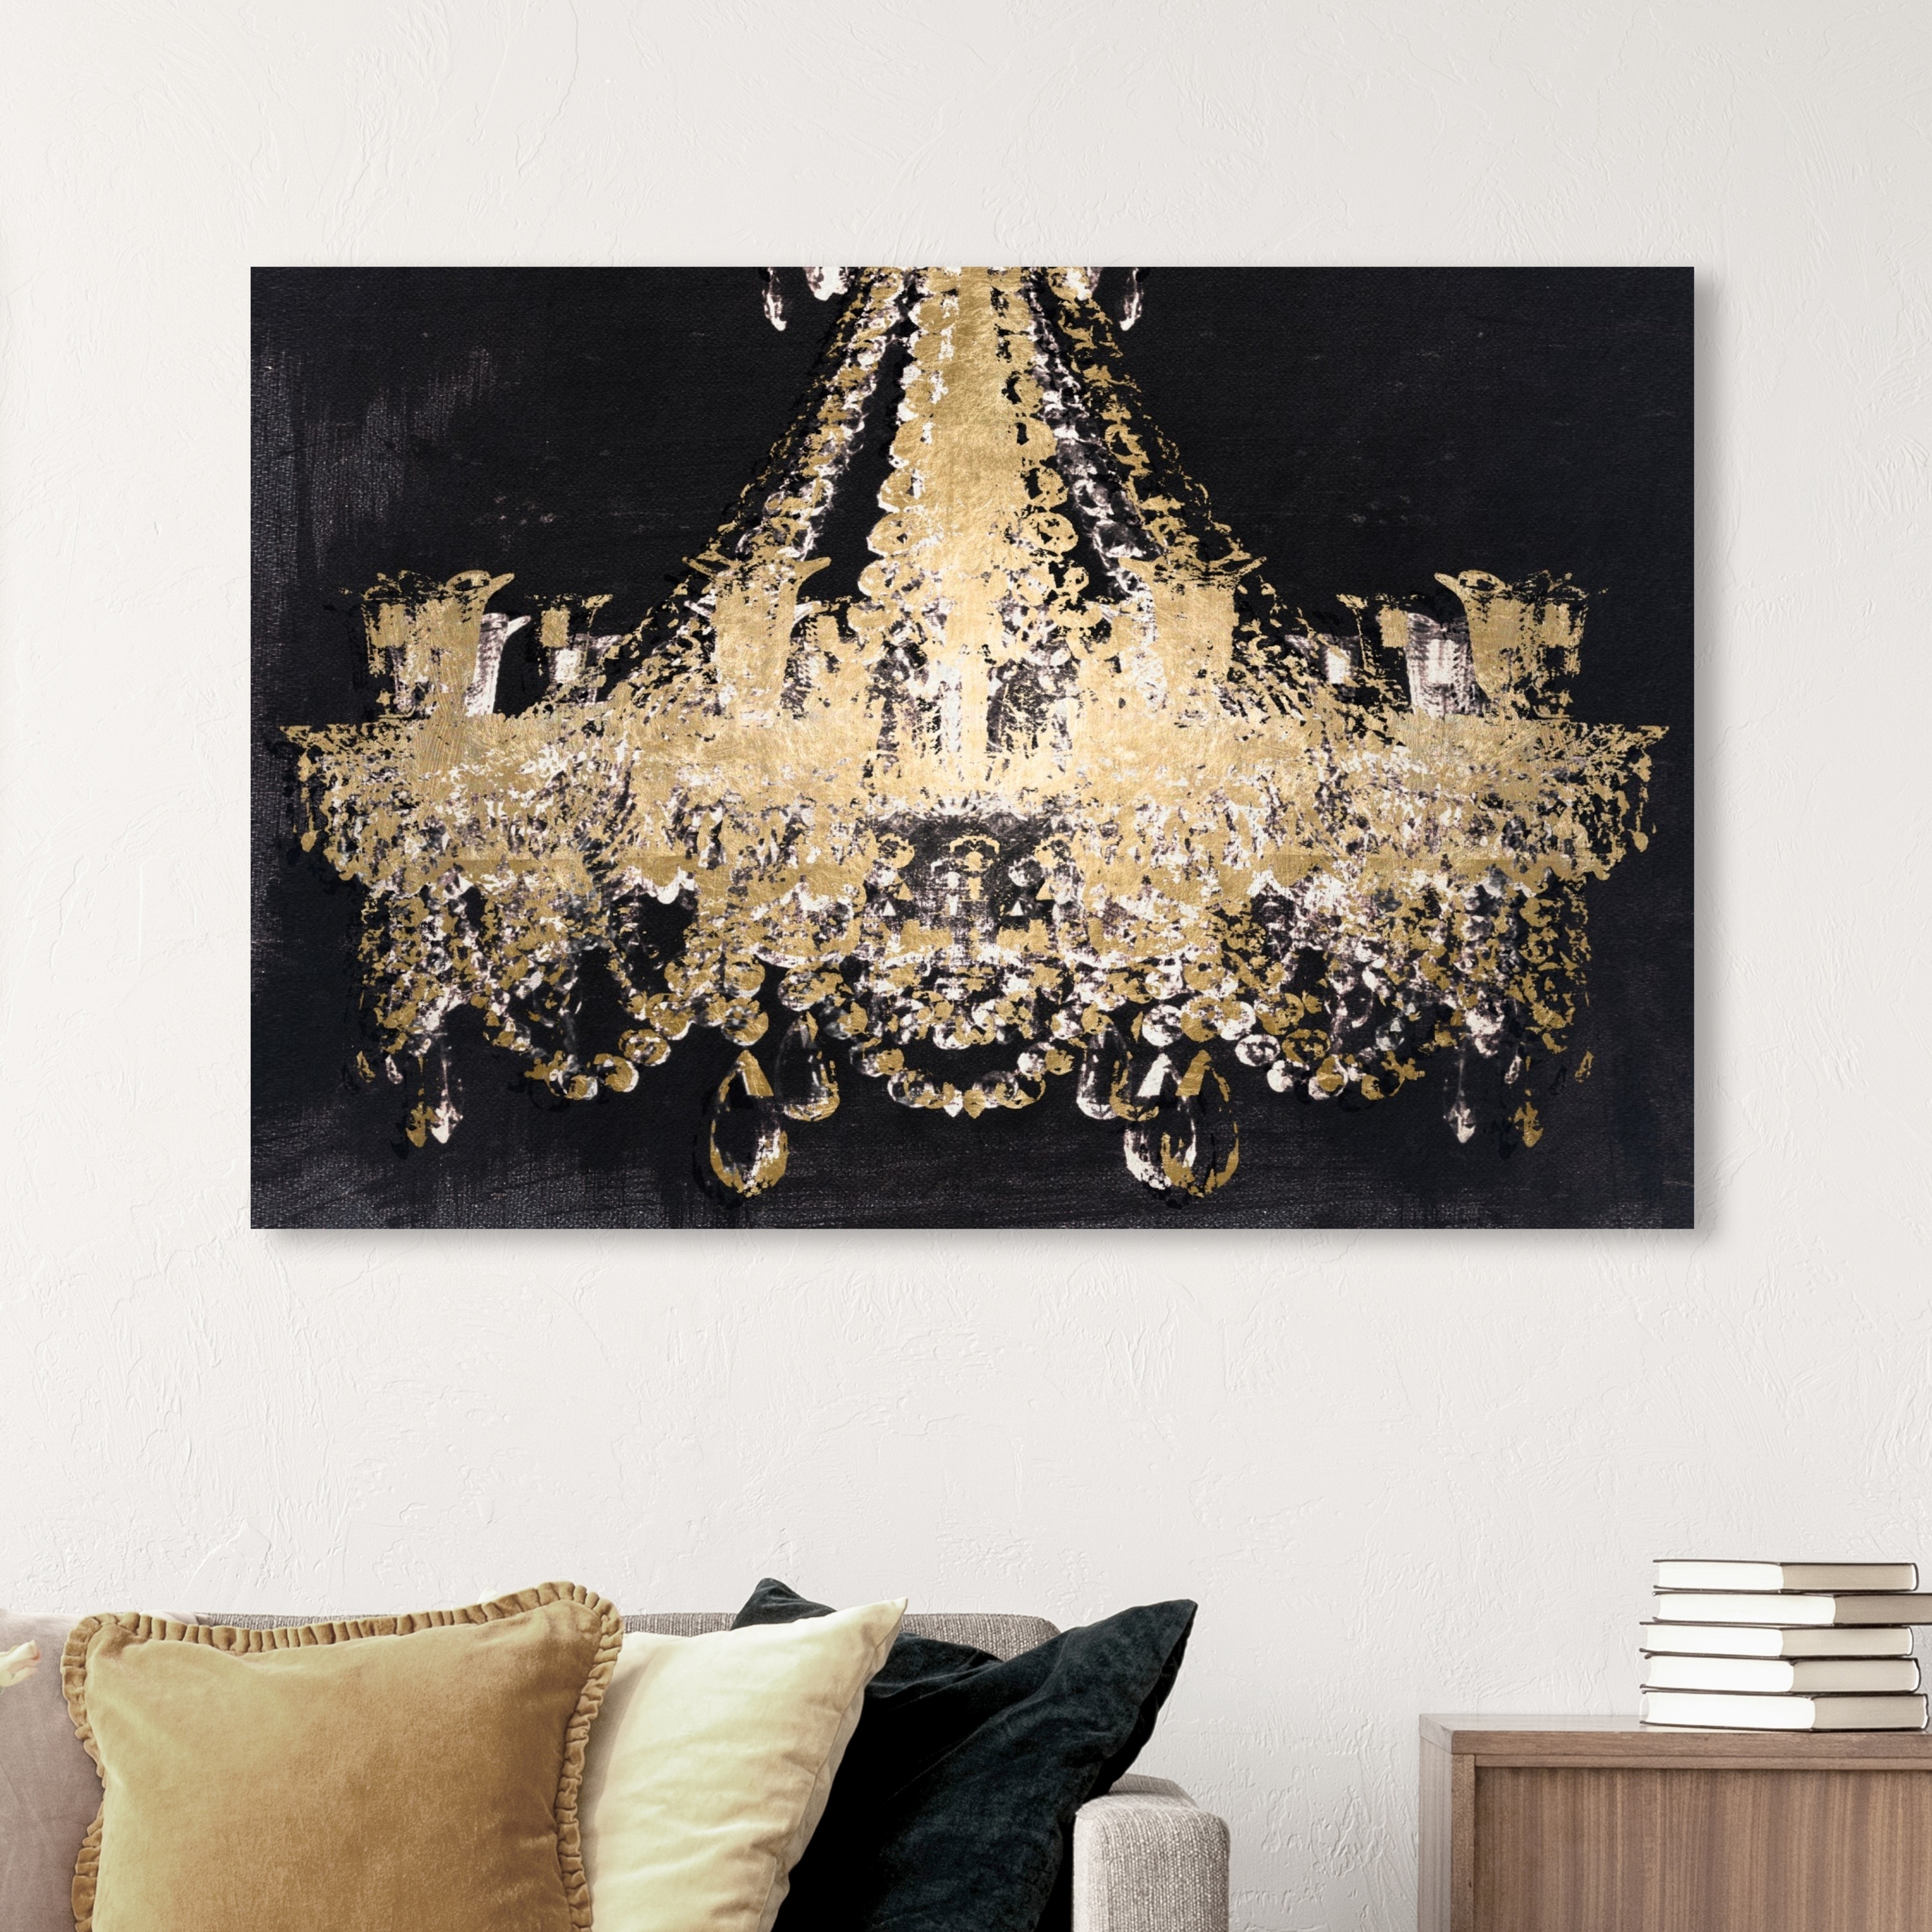 Oliver Gal 'Articles de Voyage Gold' Fashion and Glam Wall Art Canvas Print  - Gold, Black - On Sale - Bed Bath & Beyond - 28584921